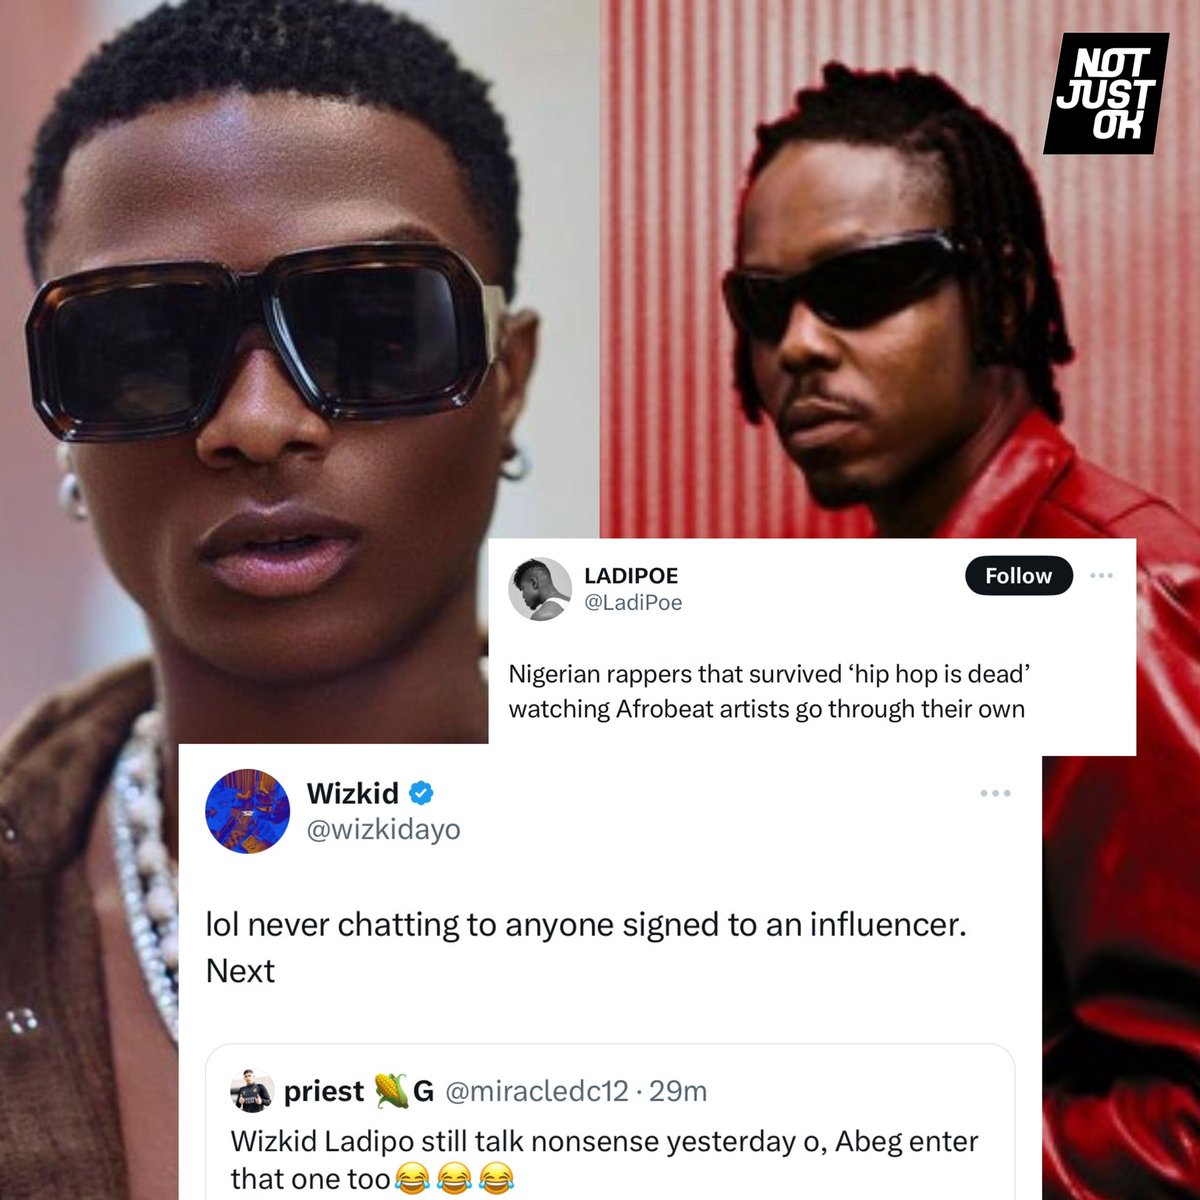 Wizkid reacts to Ladipoe’s tweet on his current opinion on Afrobeats